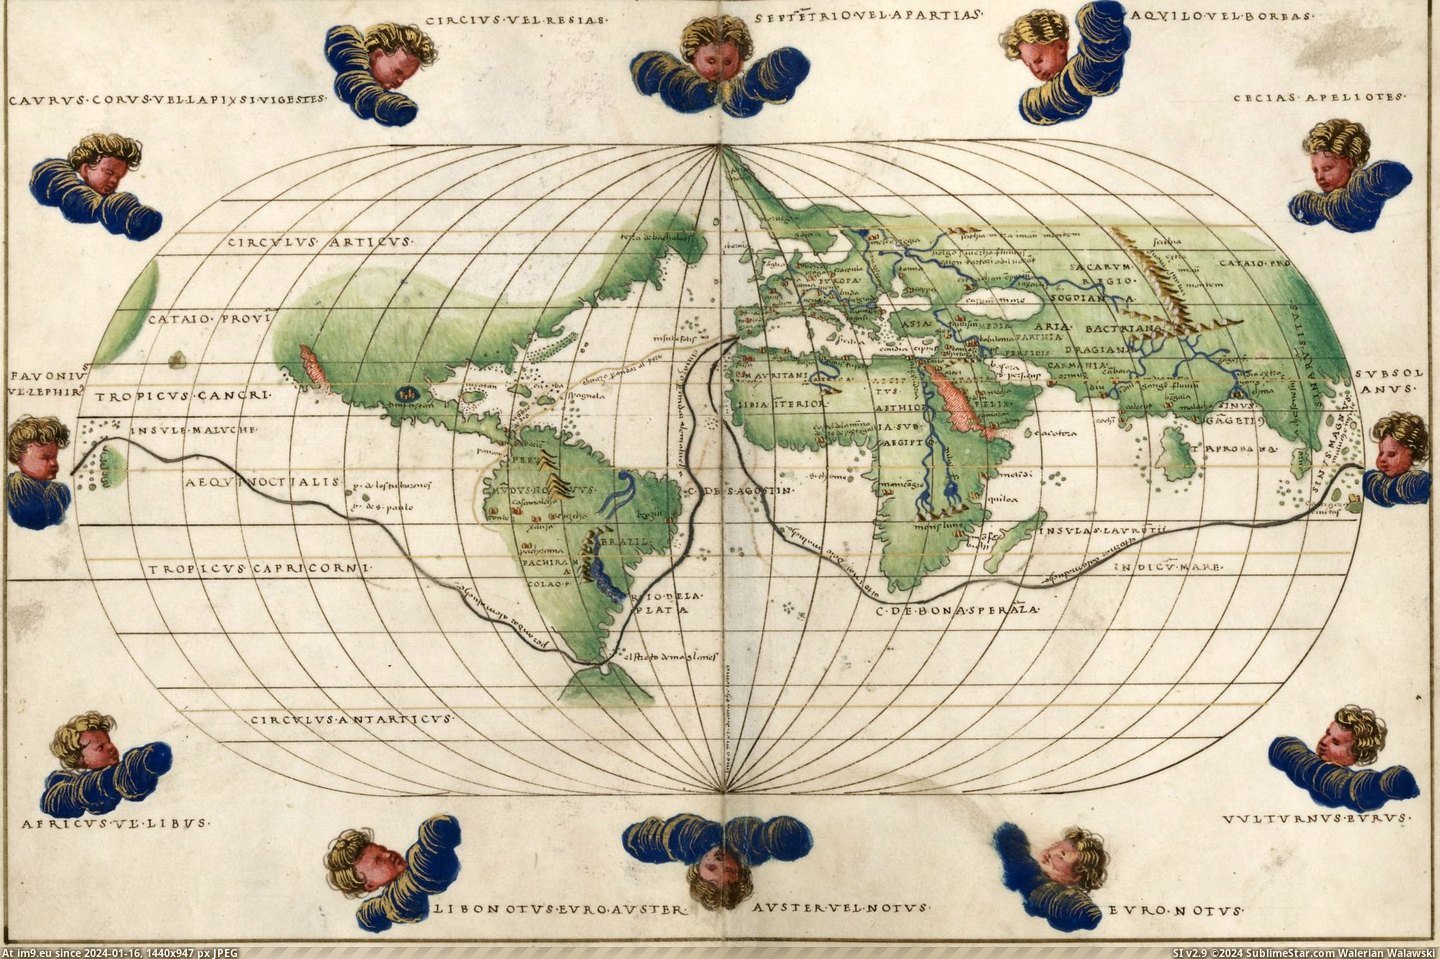 #Old #Earth #Atlas #Map [Mapporn] Magellan's Circumnavigation of the Earth, from the Portolan Atlas by Battista Agnese, c. 1544. [2235x1482] Pic. (Image of album My r/MAPS favs))